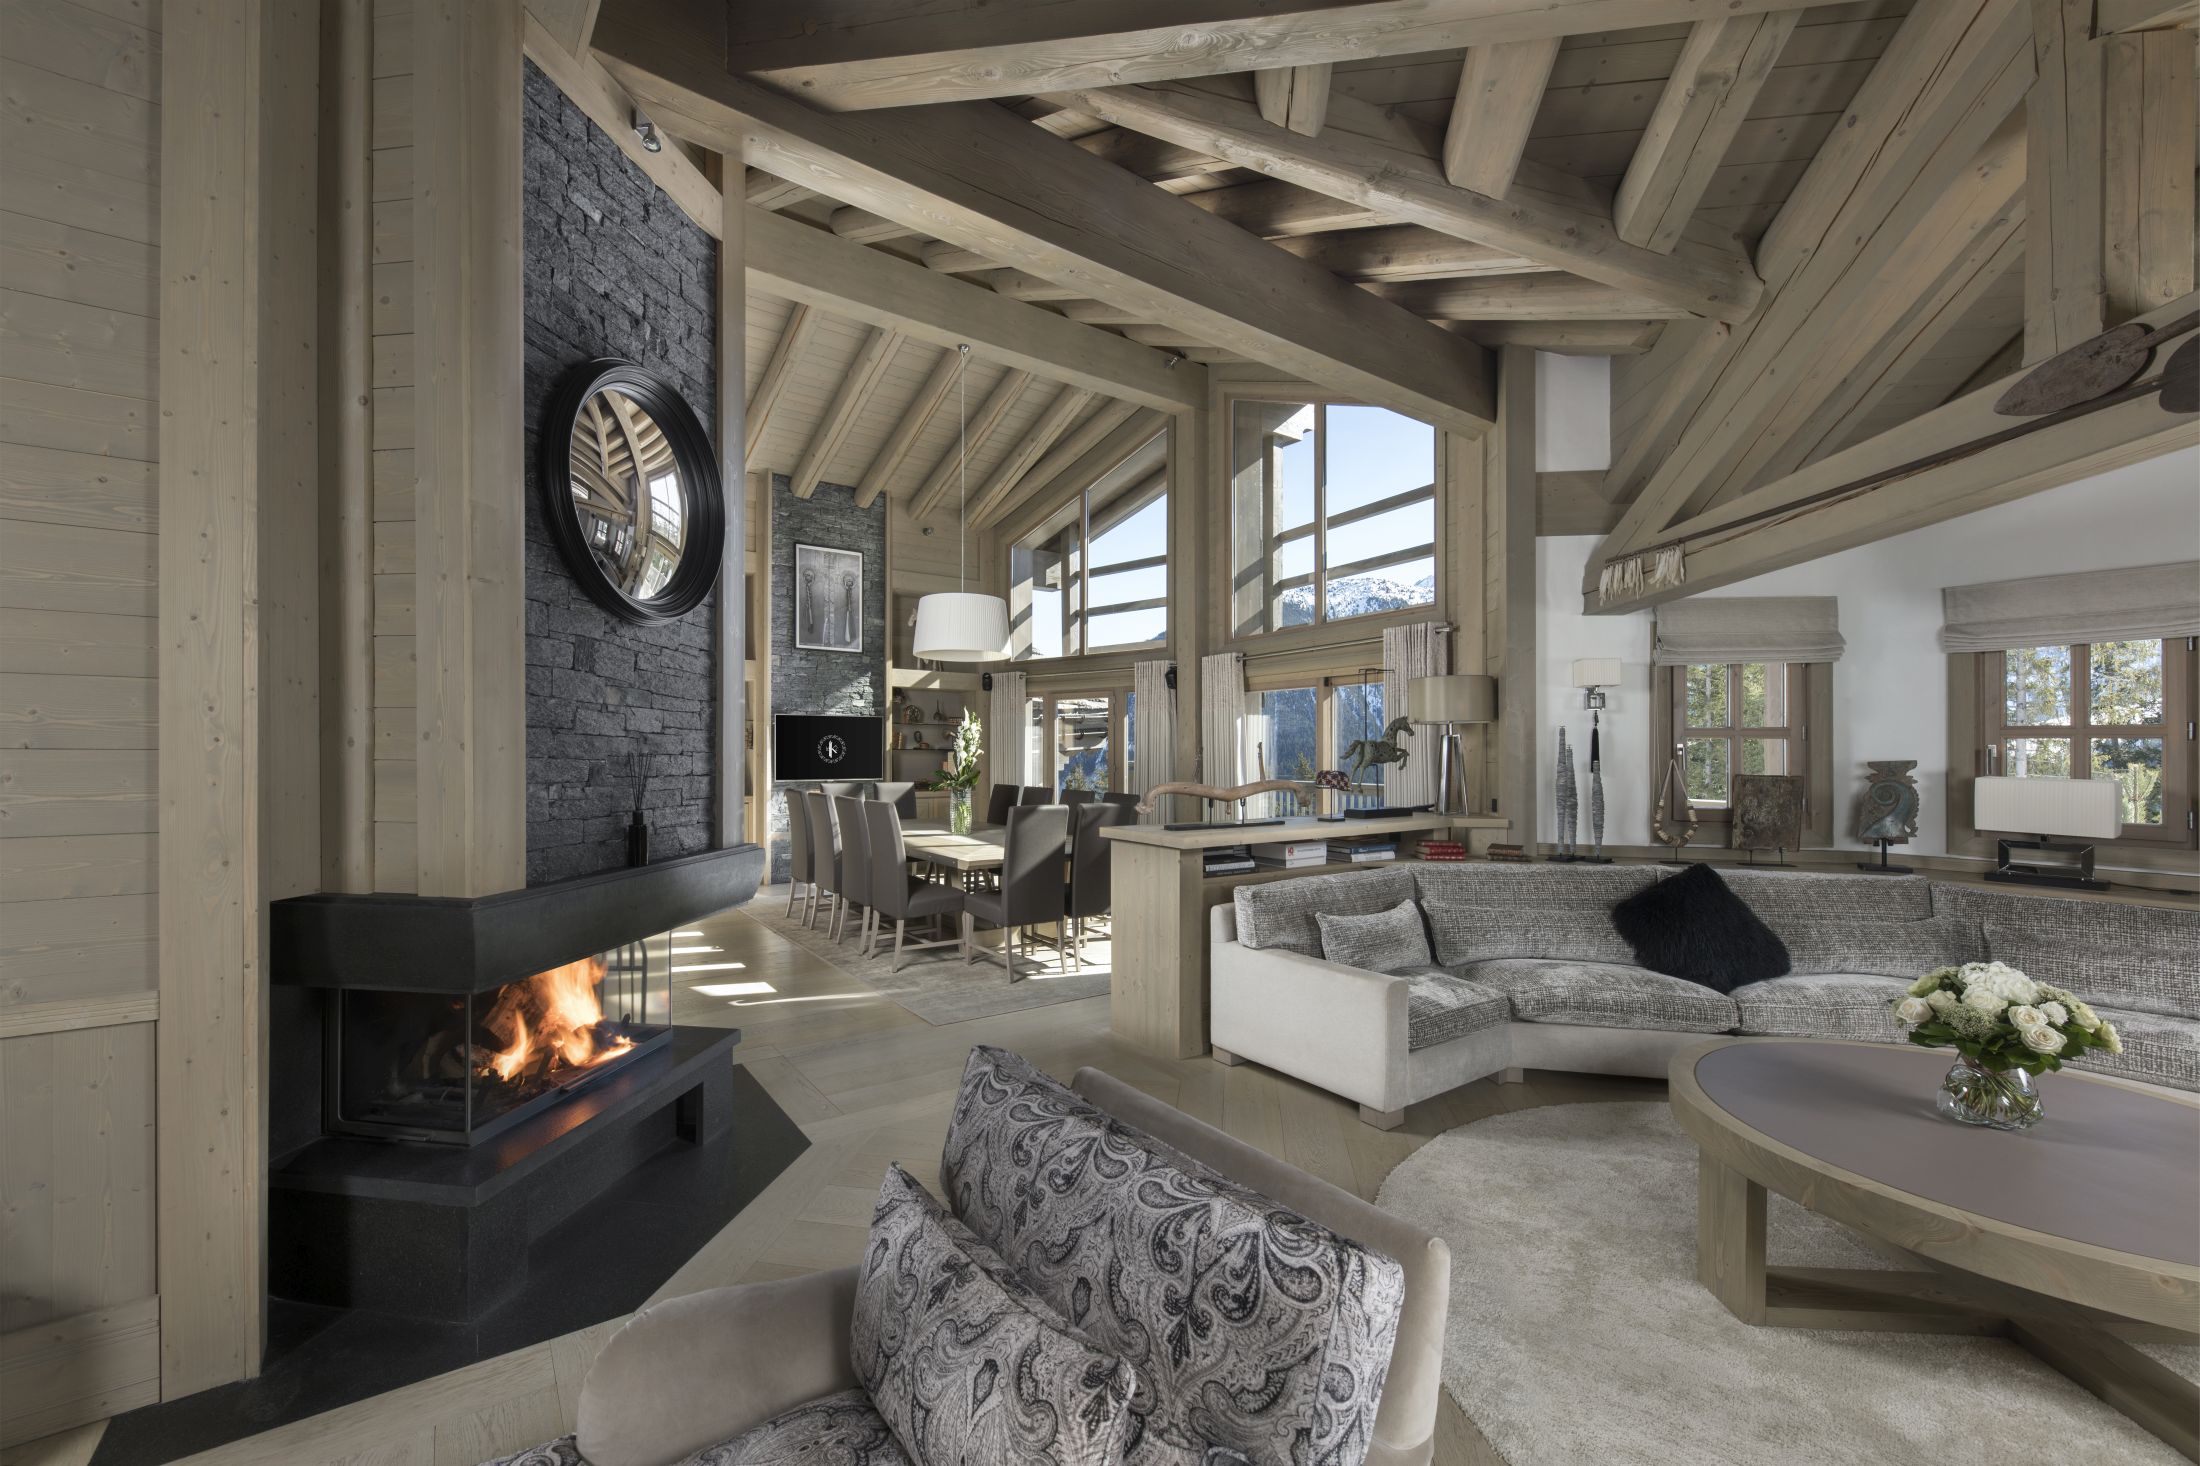 The best luxury ski resorts in the Alps